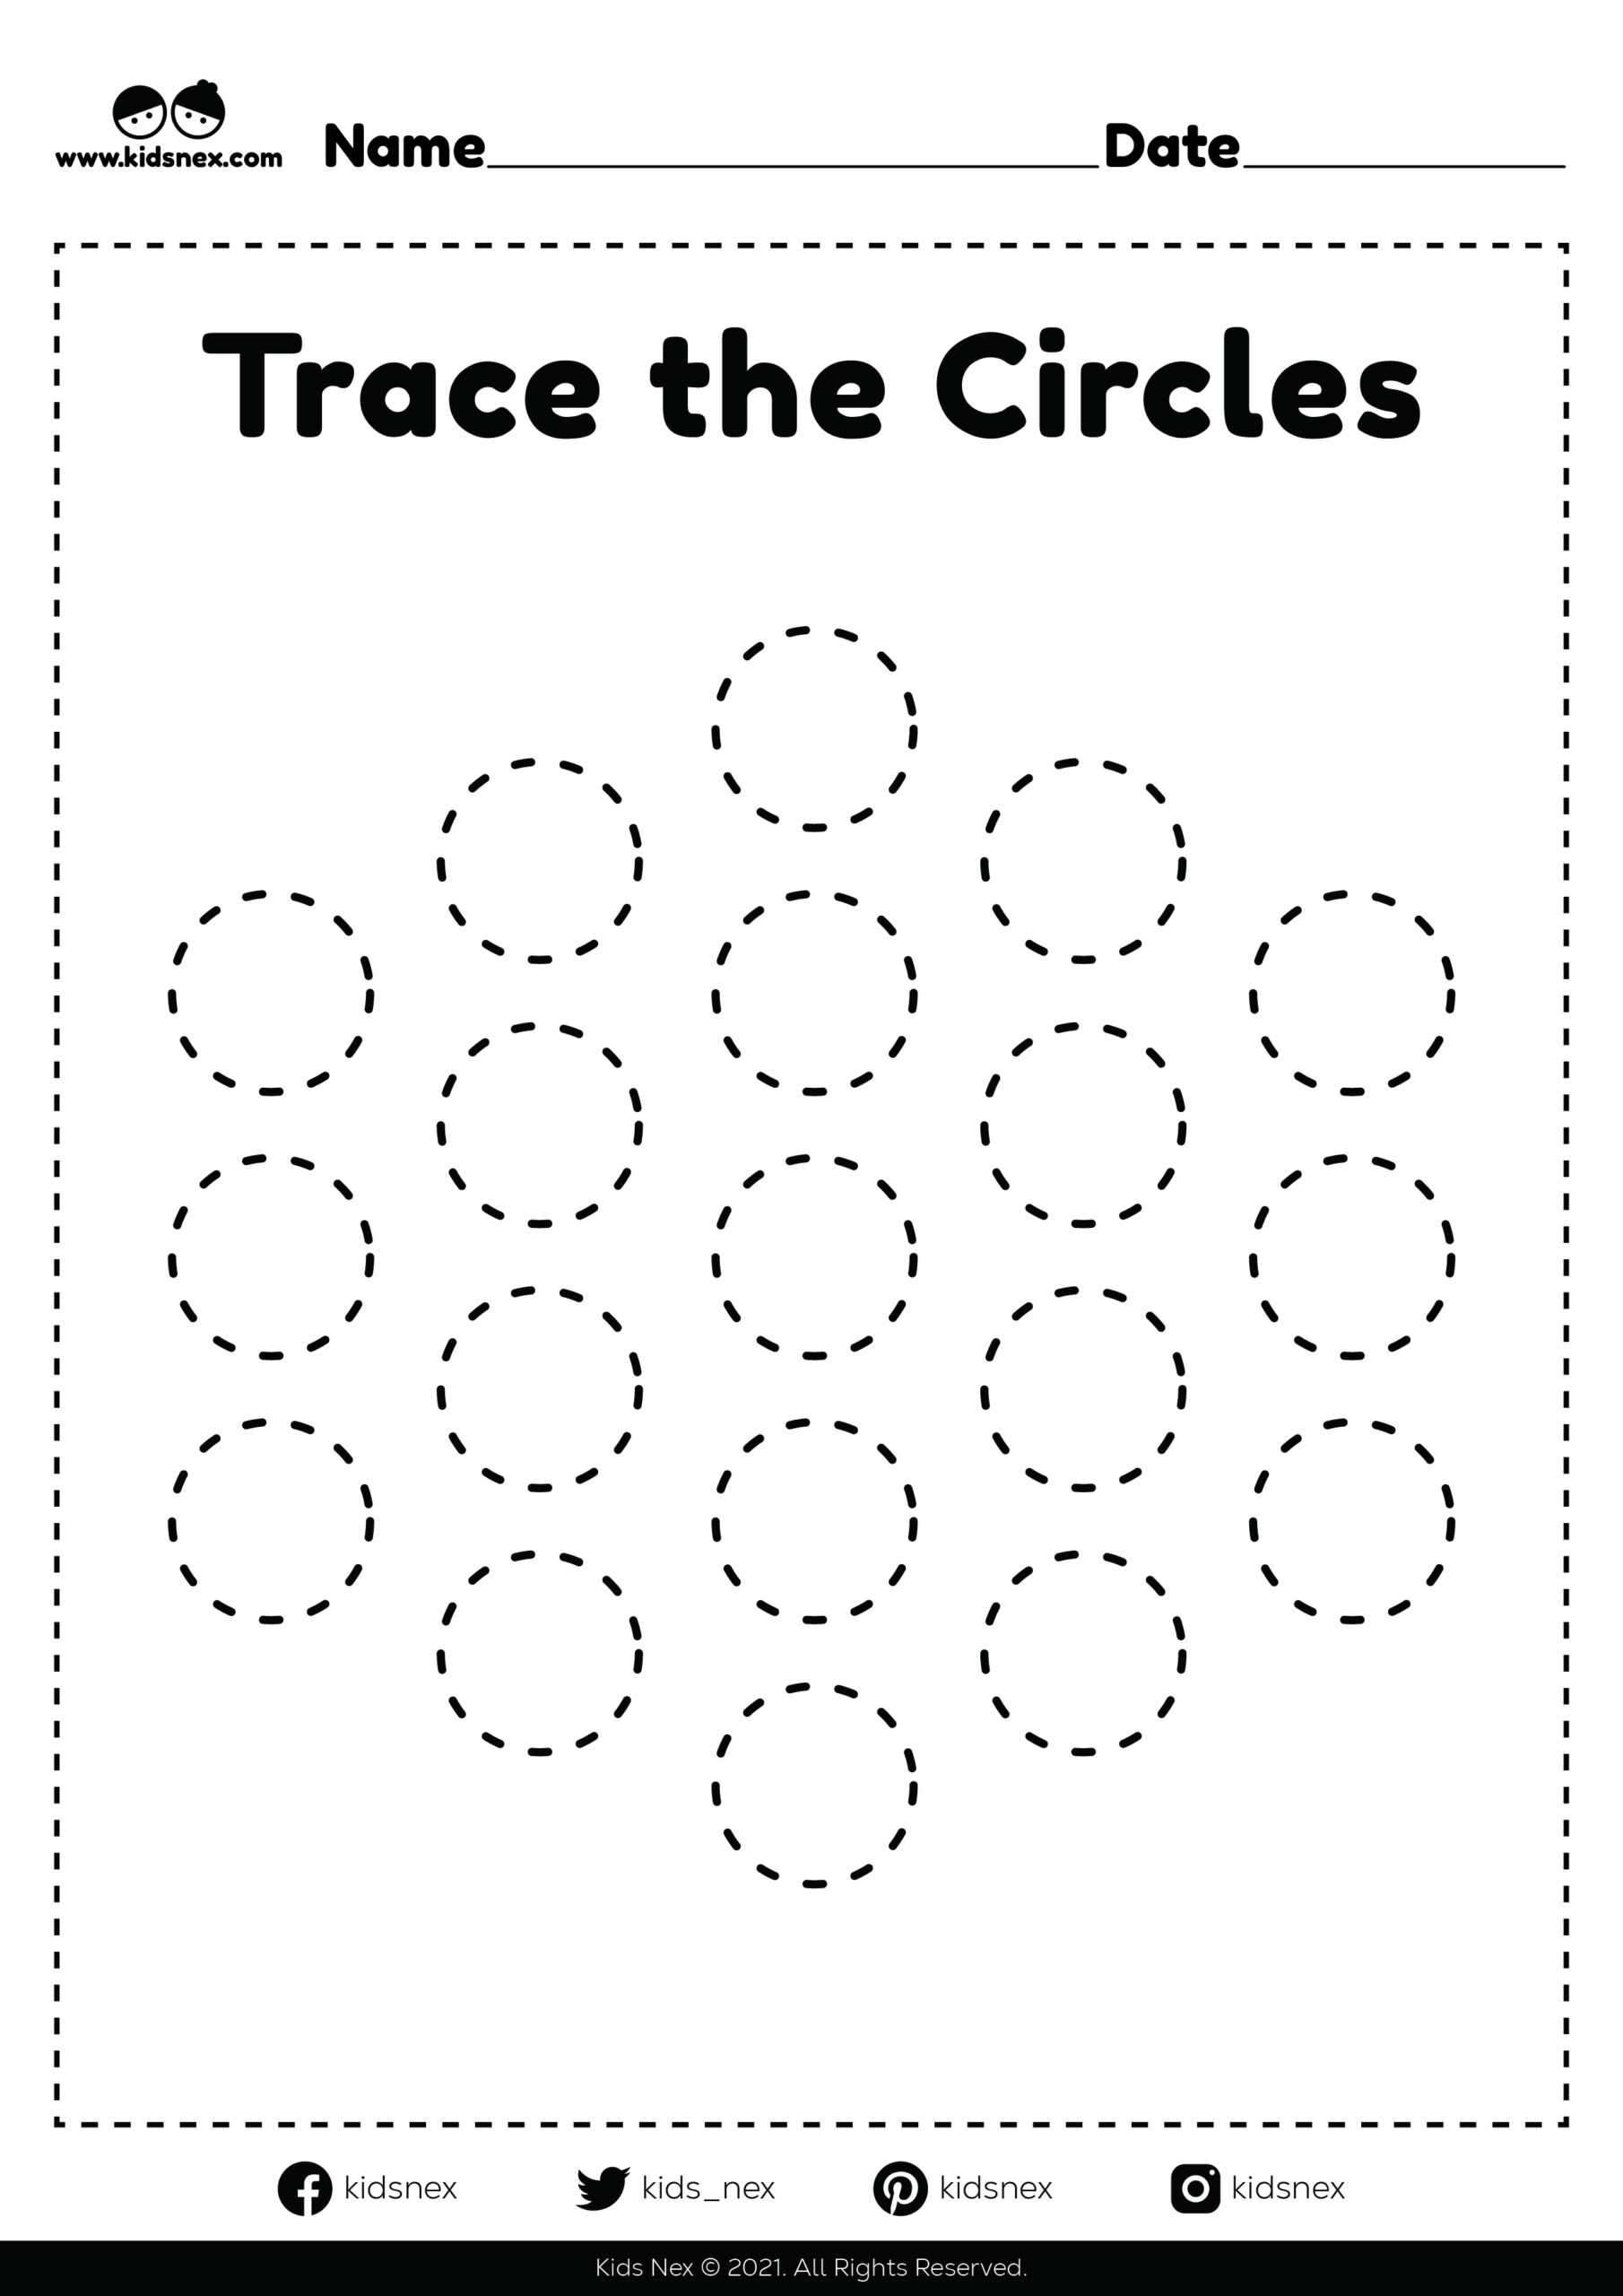 Tracing circles worksheet free printable PDF file format for kindergarten and preschool kids for educational activities at home.